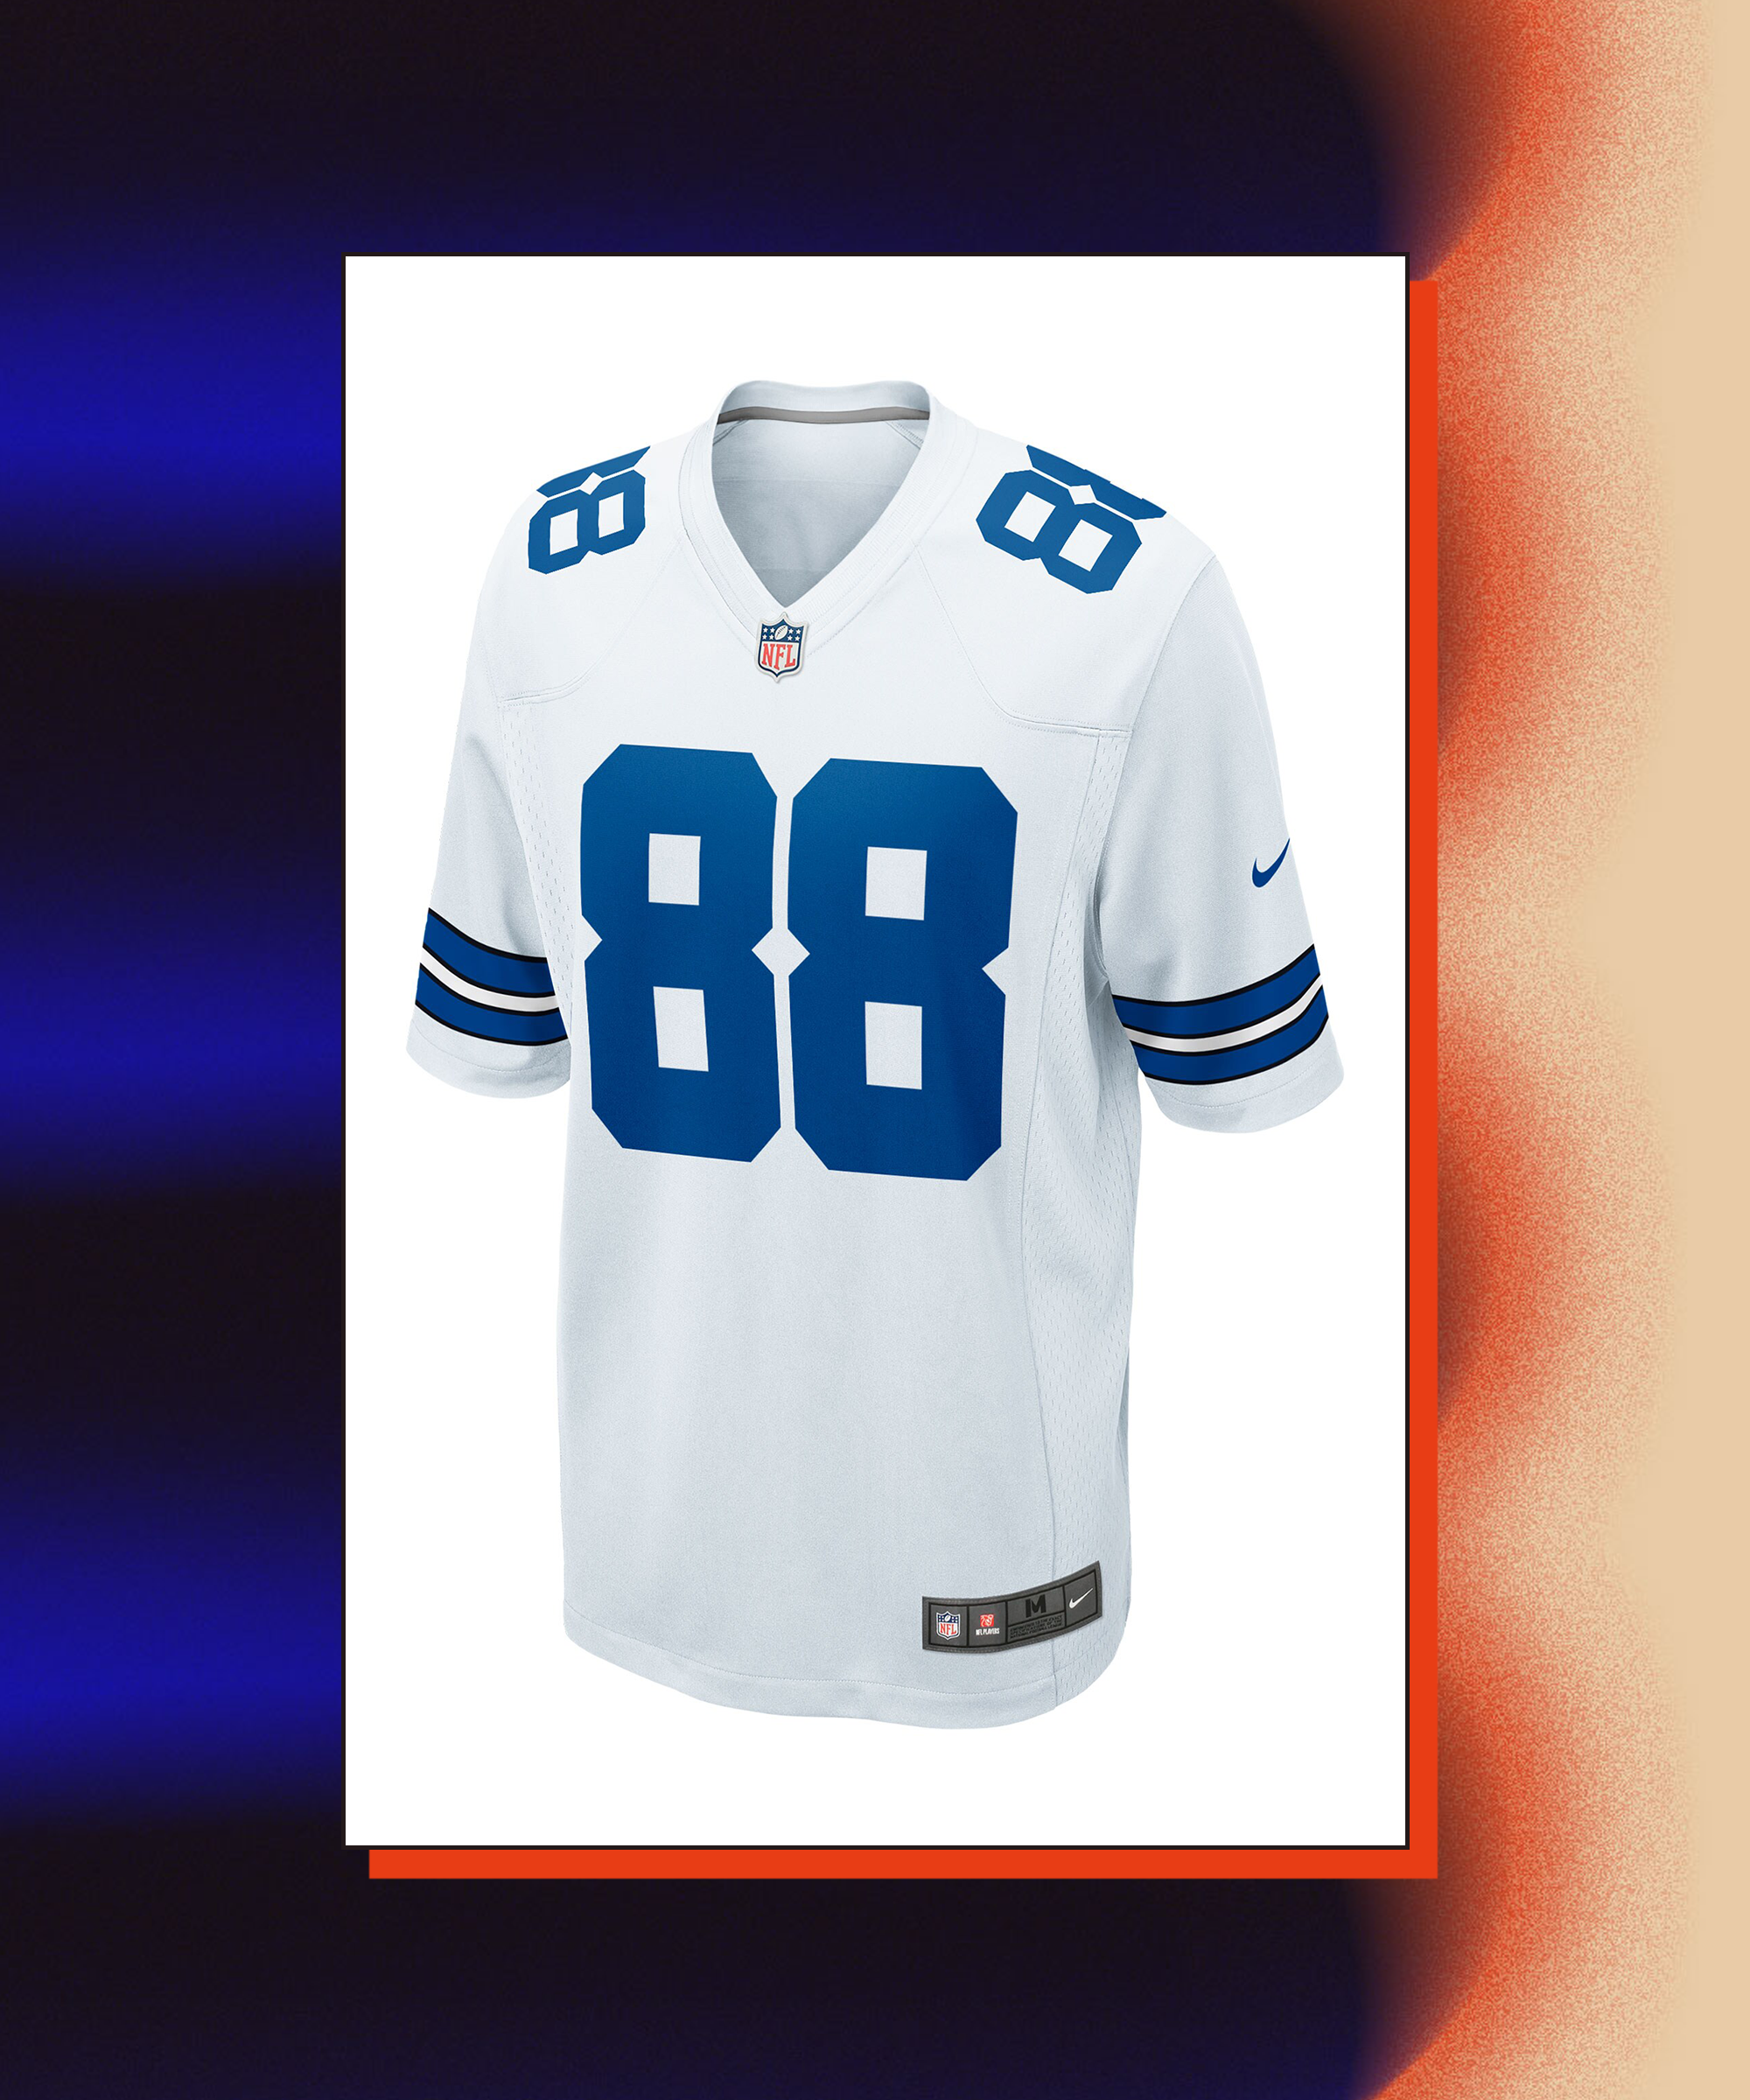 NFL Vintage Classic Jerseys That are Making a Comeback in 2022